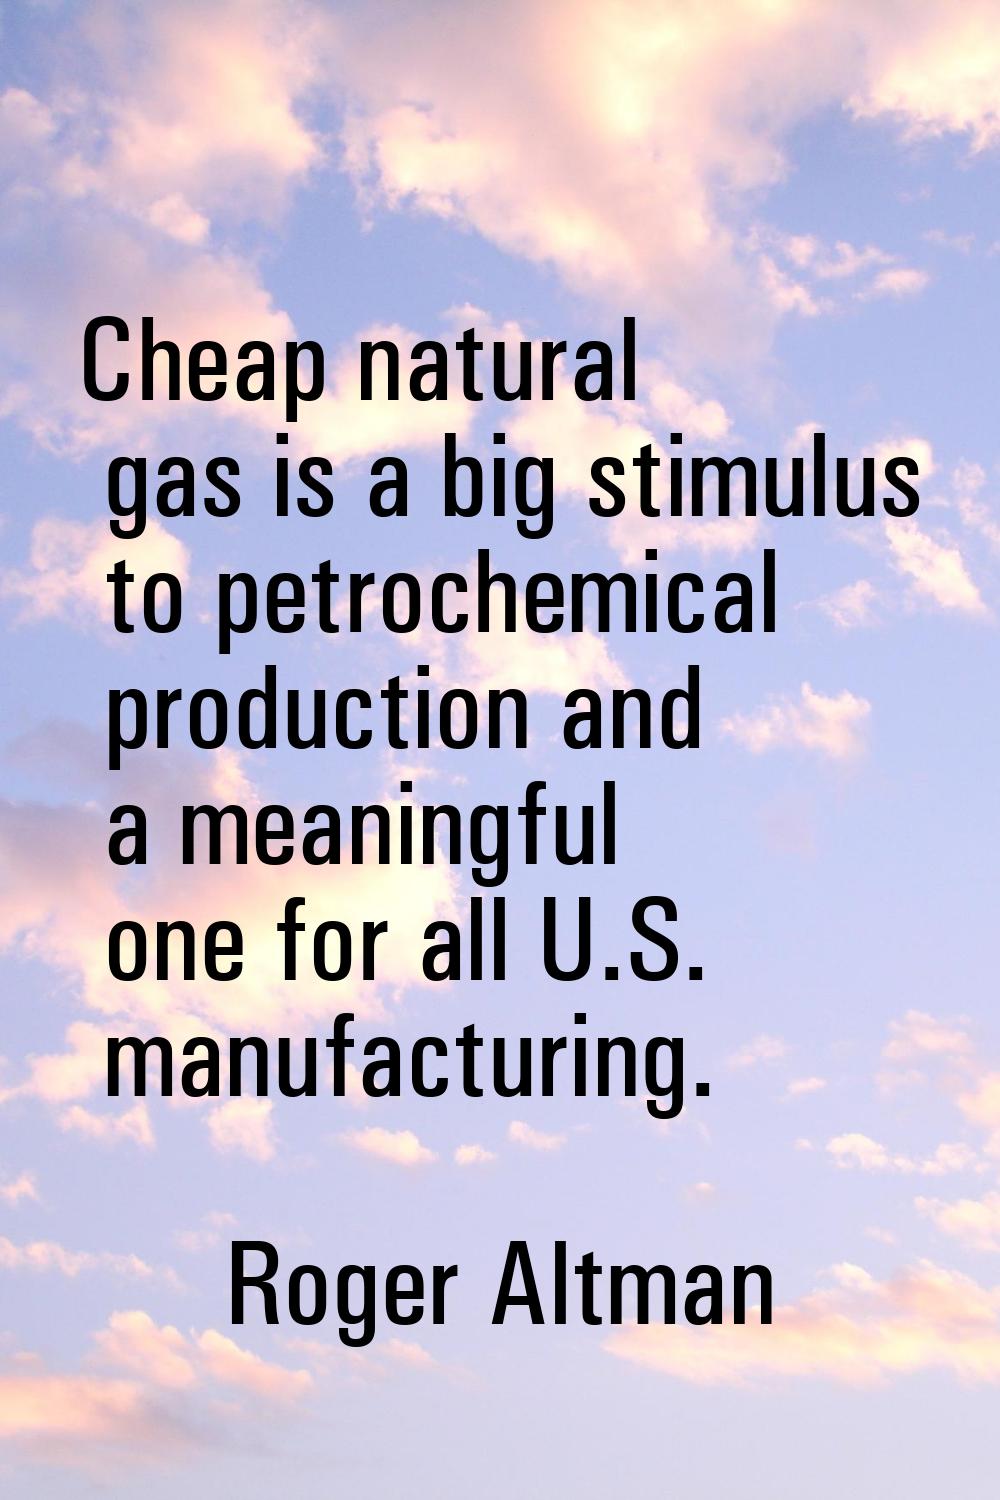 Cheap natural gas is a big stimulus to petrochemical production and a meaningful one for all U.S. m